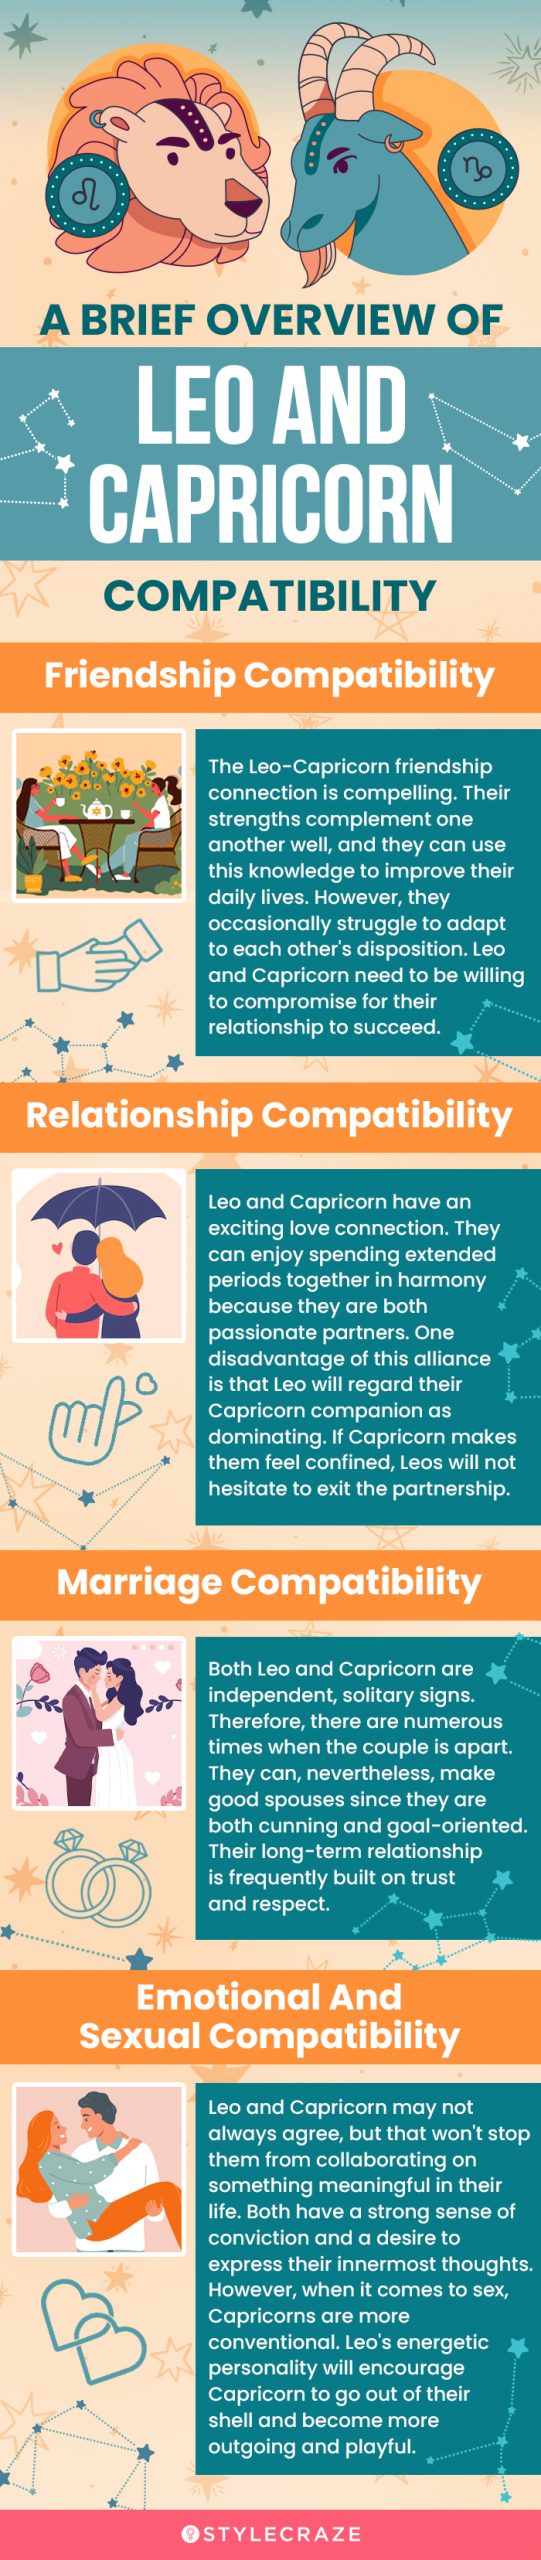 a brief overview of leo and capricorn compatibility (infographic)